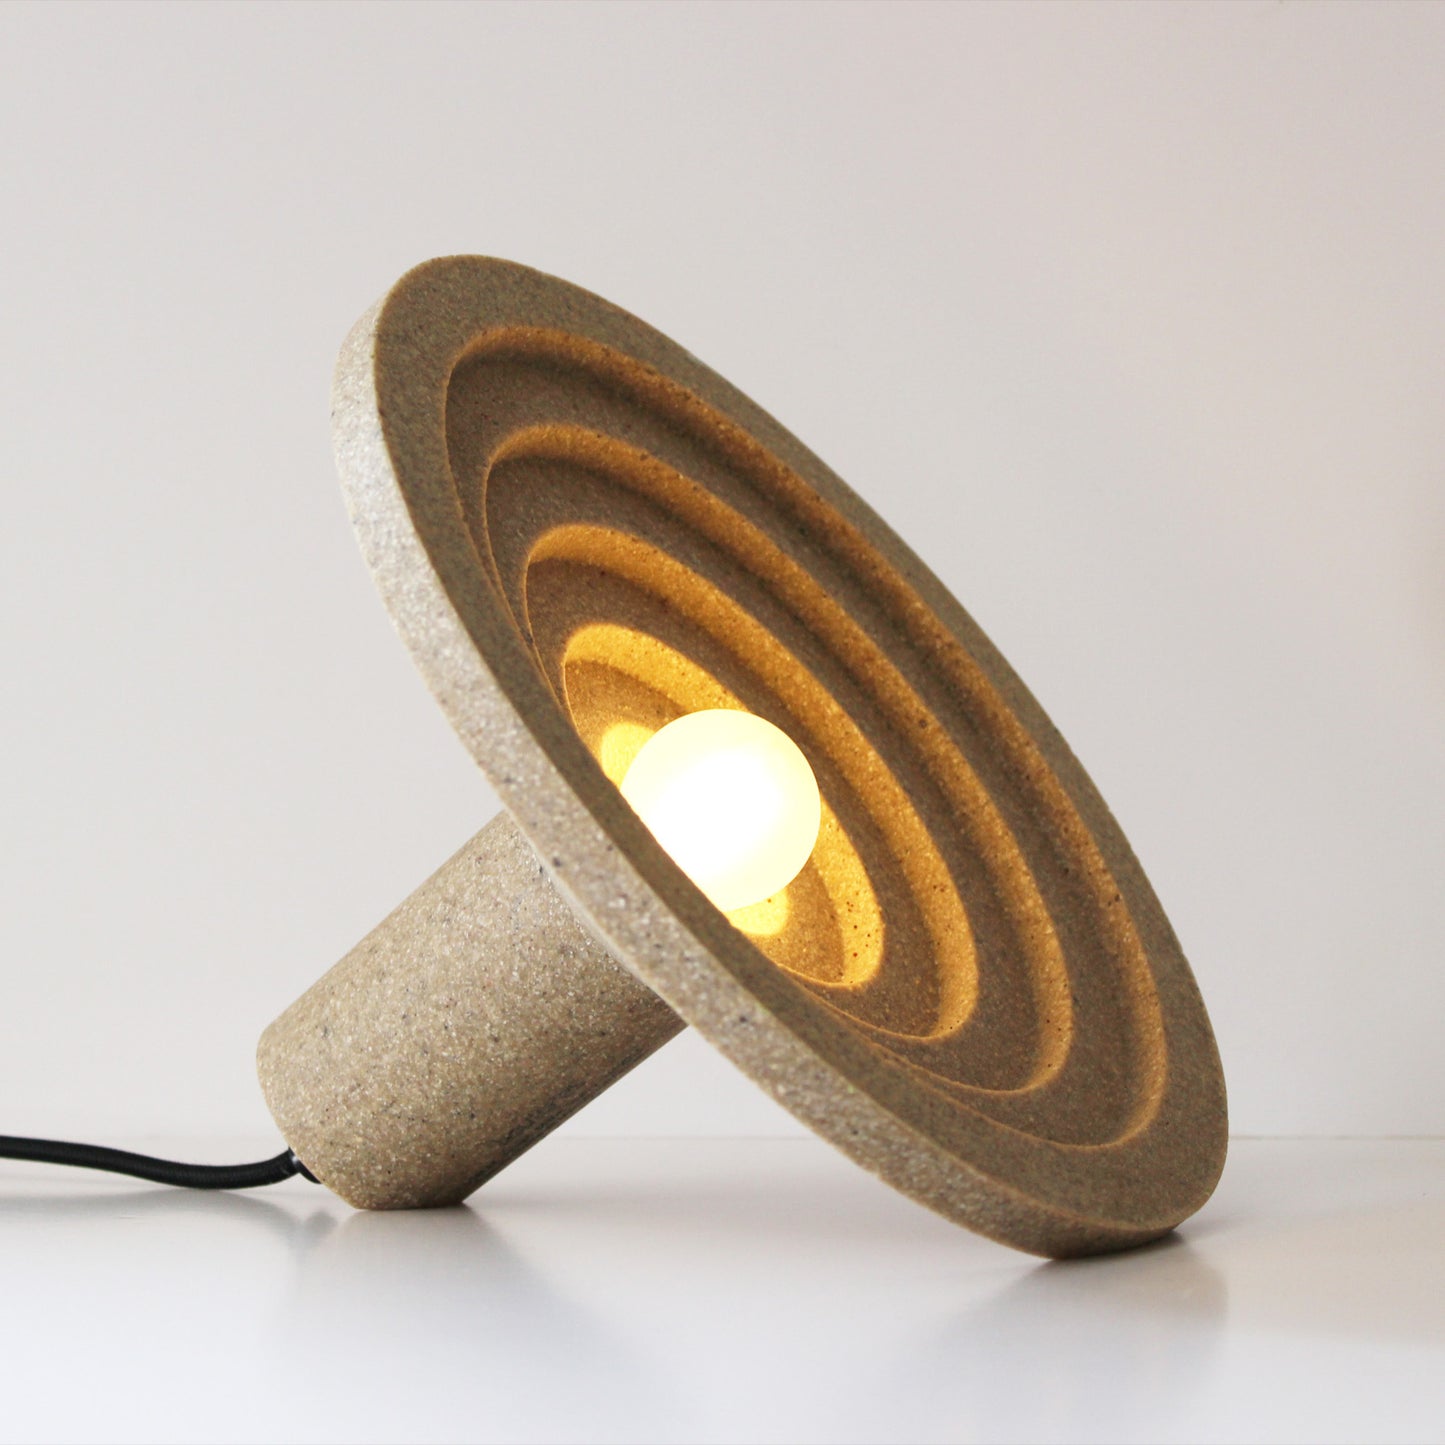 Table lamp in recycled oyster shells - Scalaé